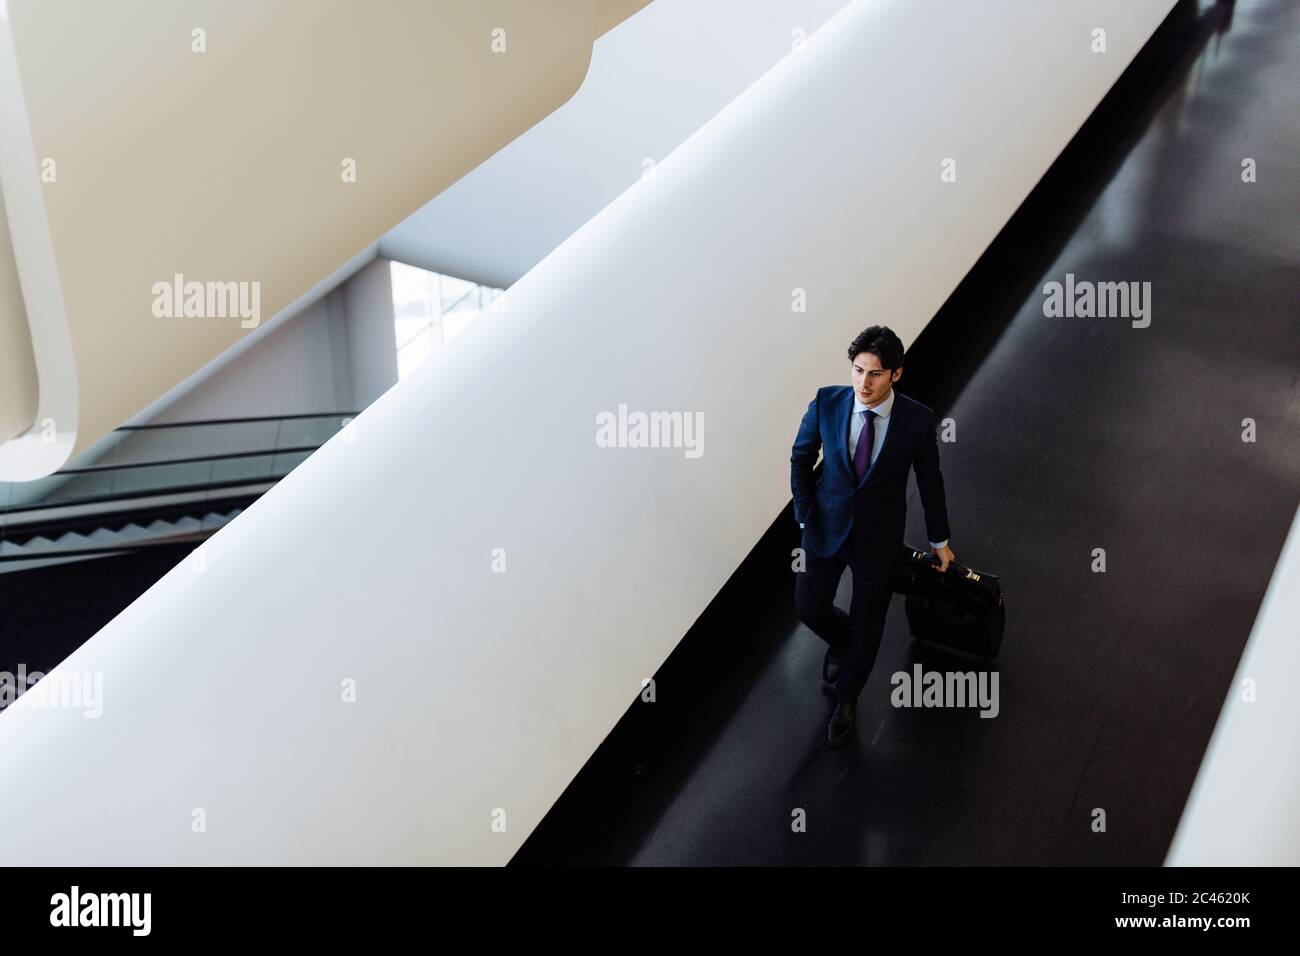 Businessman with wheeled luggage in hotel building Stock Photo